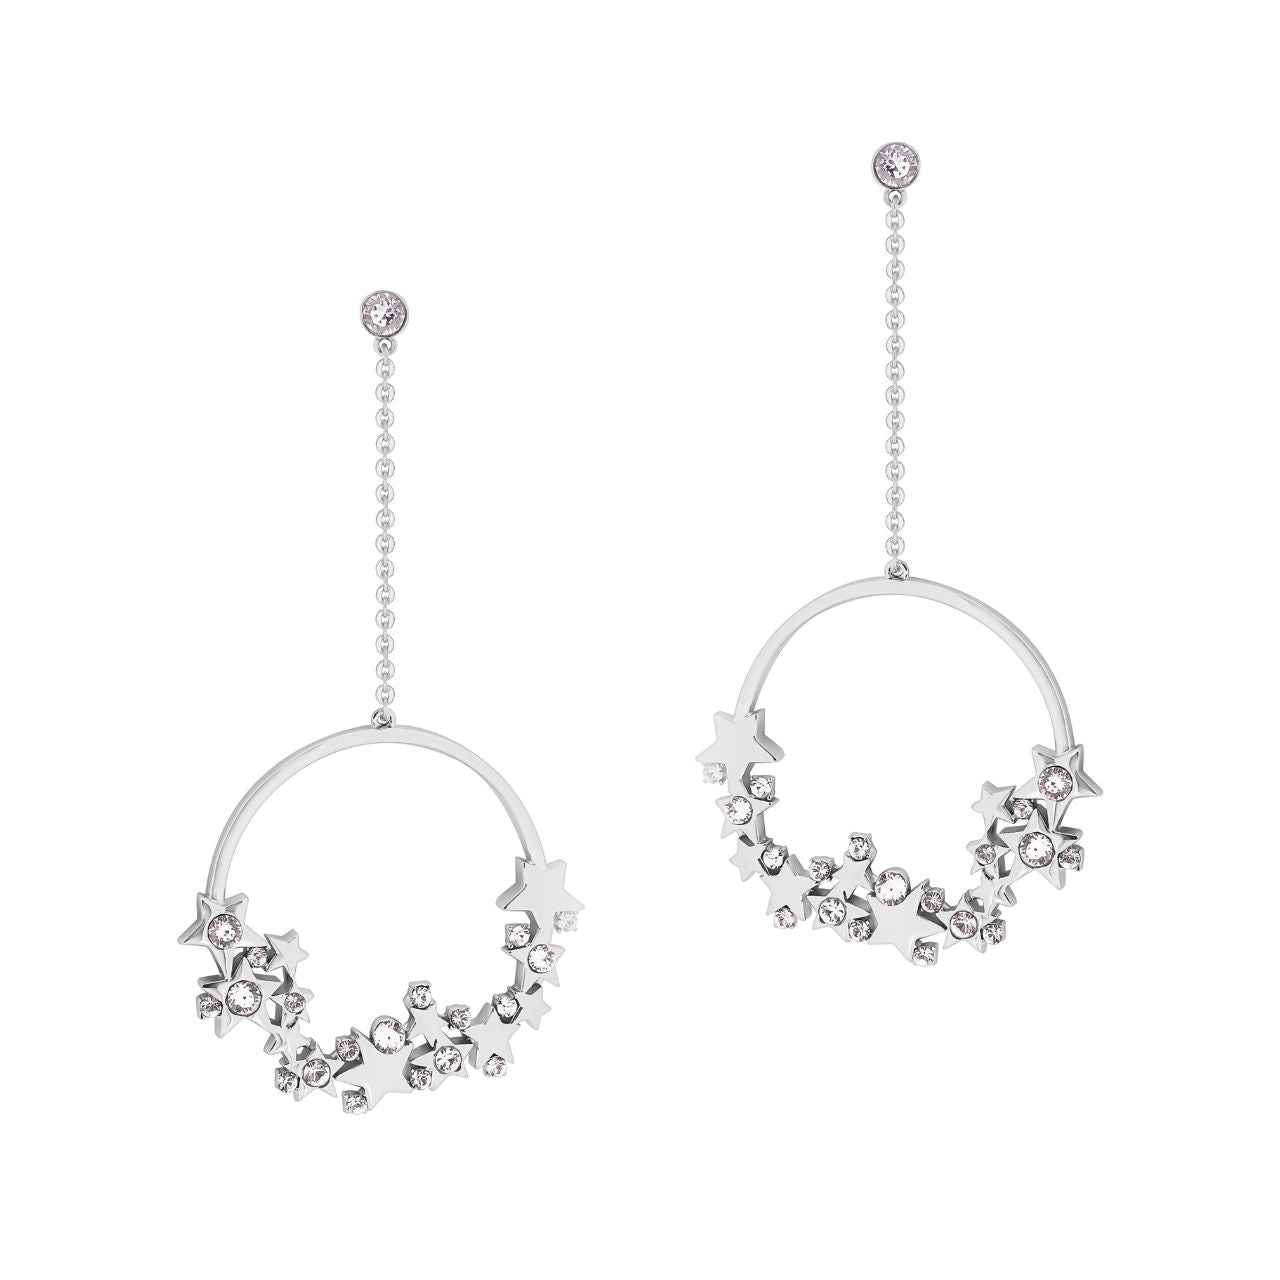 The Tipperary Star Cluster Earrings in silver are the perfect accessory to add a touch of elegance and shine to any outfit. With a unique star cluster design, these earrings are sure to catch the eye and make a statement. Stand out with these stunning earrings from Tipperary, a trusted name in fine jewellery.